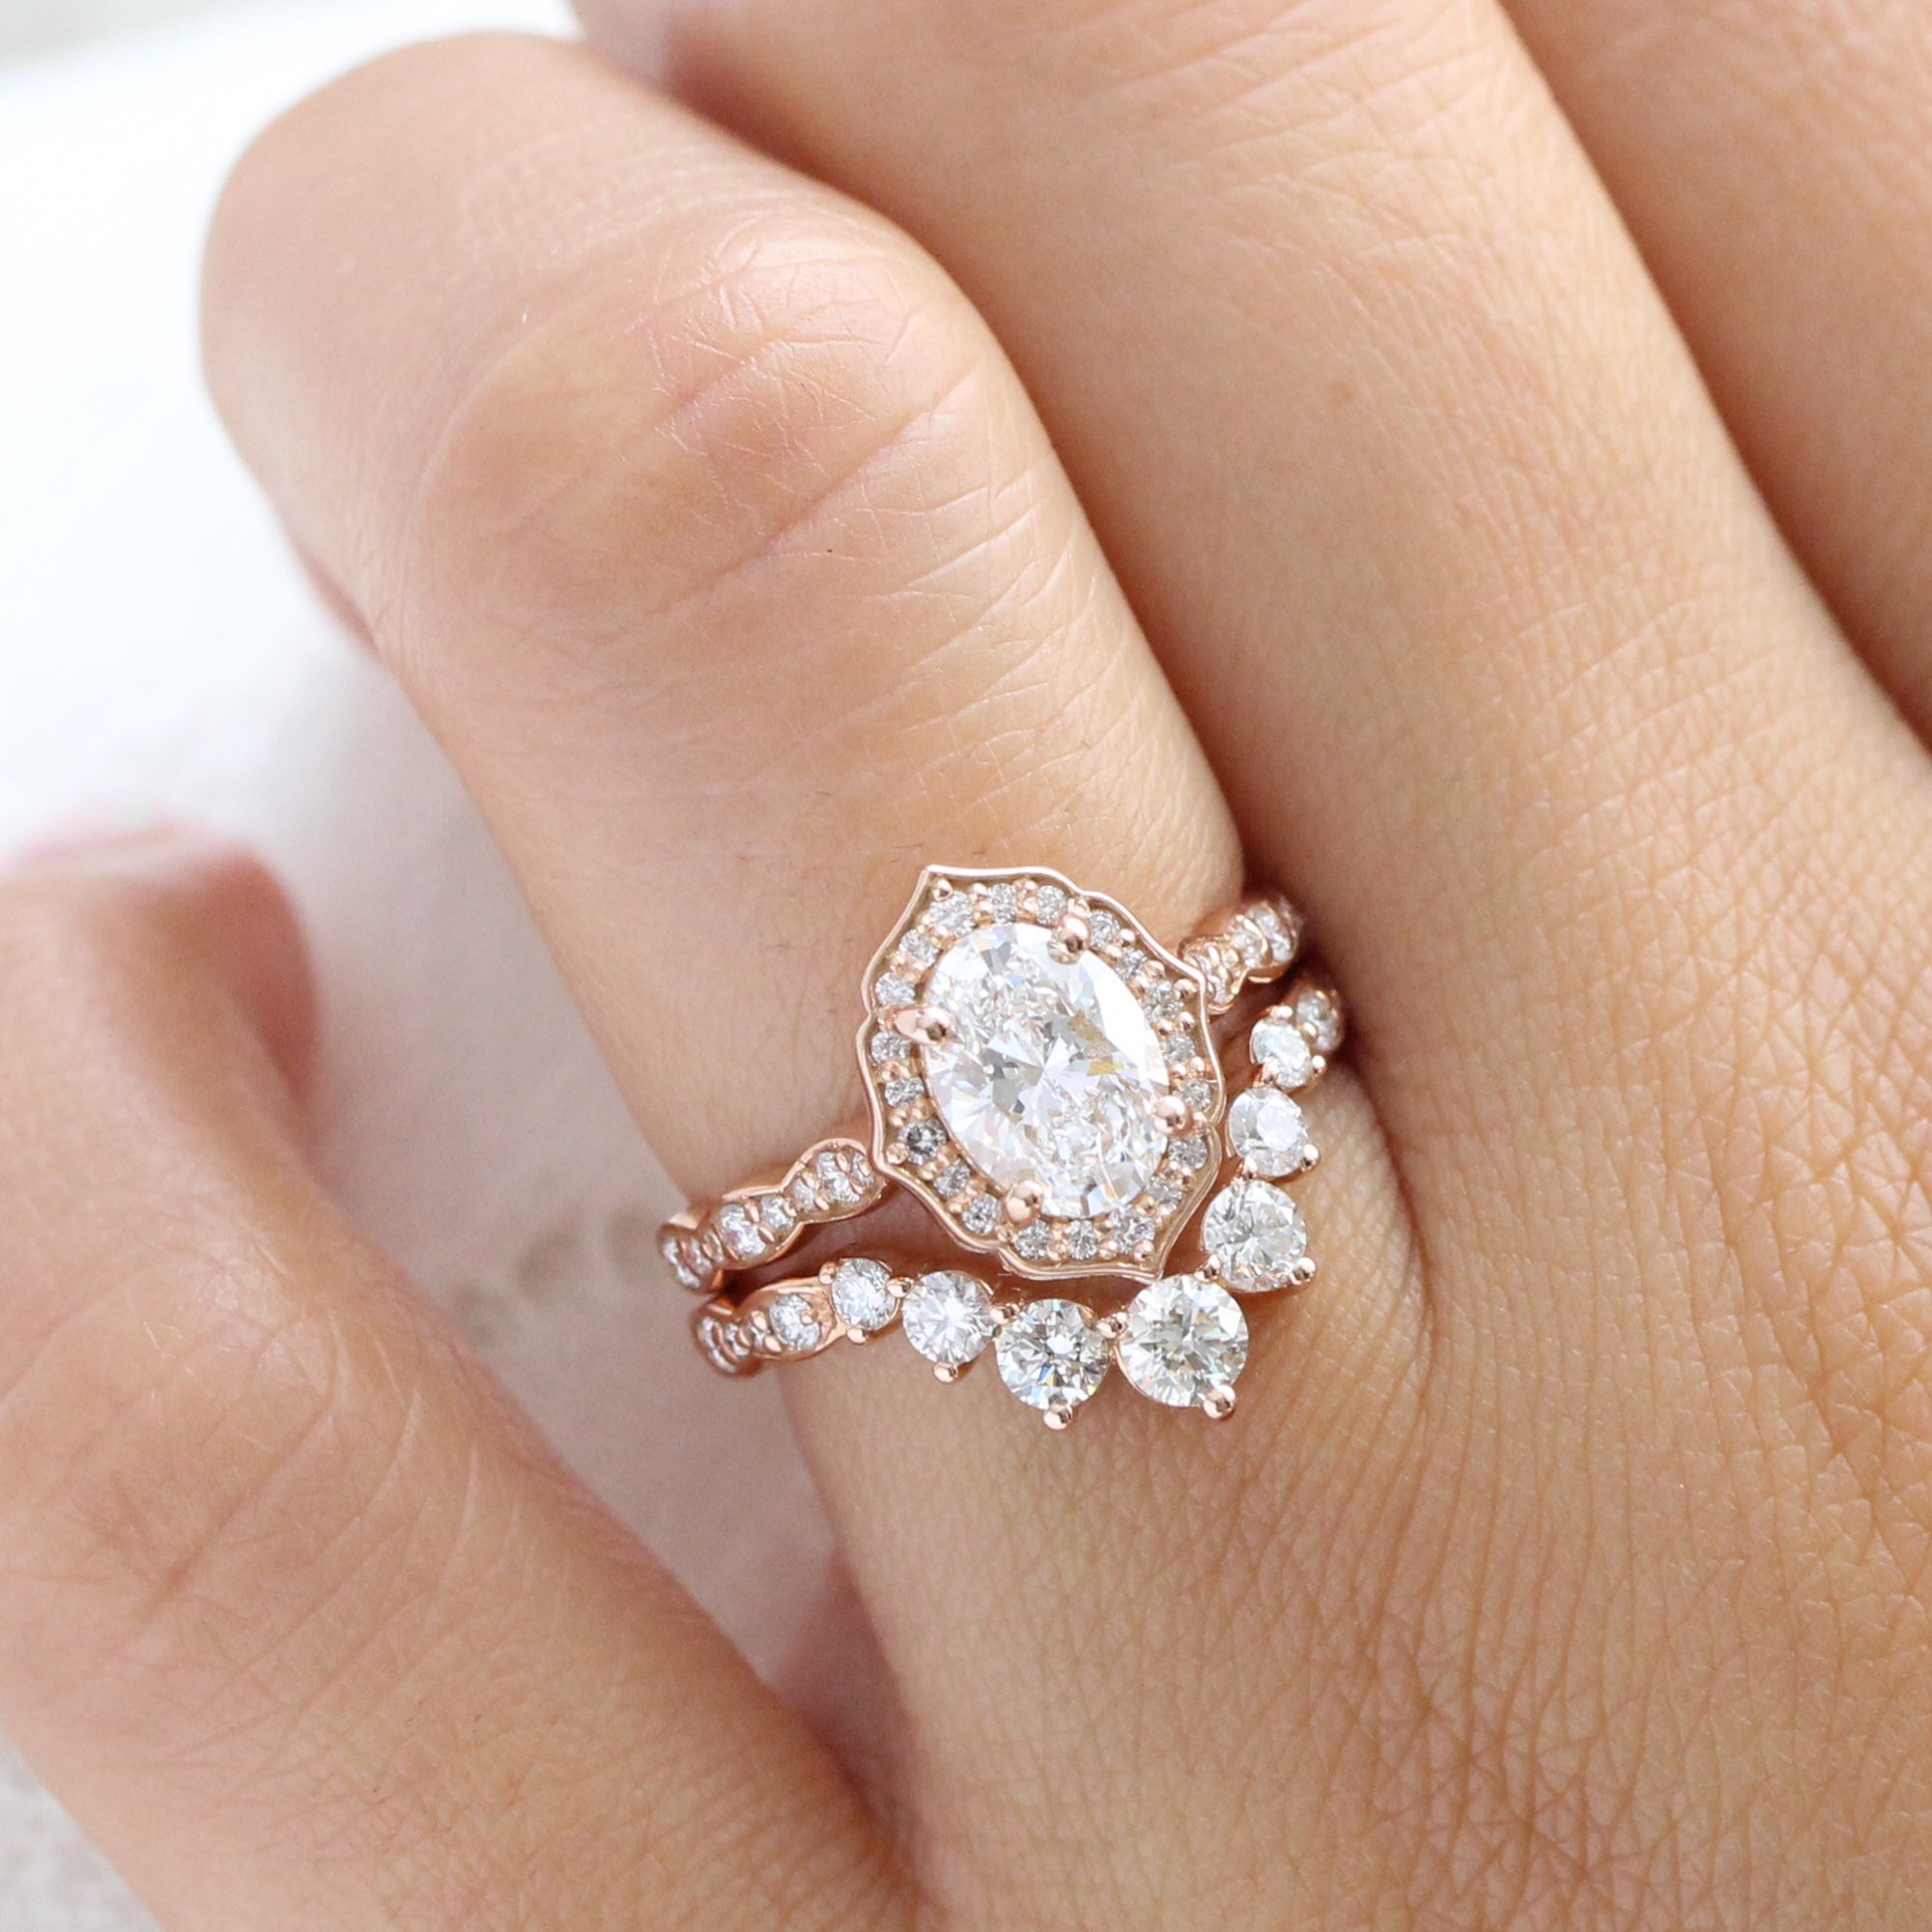 Cupid's Engagement Ring Pick for Valentine's - Vintage Halo Diamond Ring